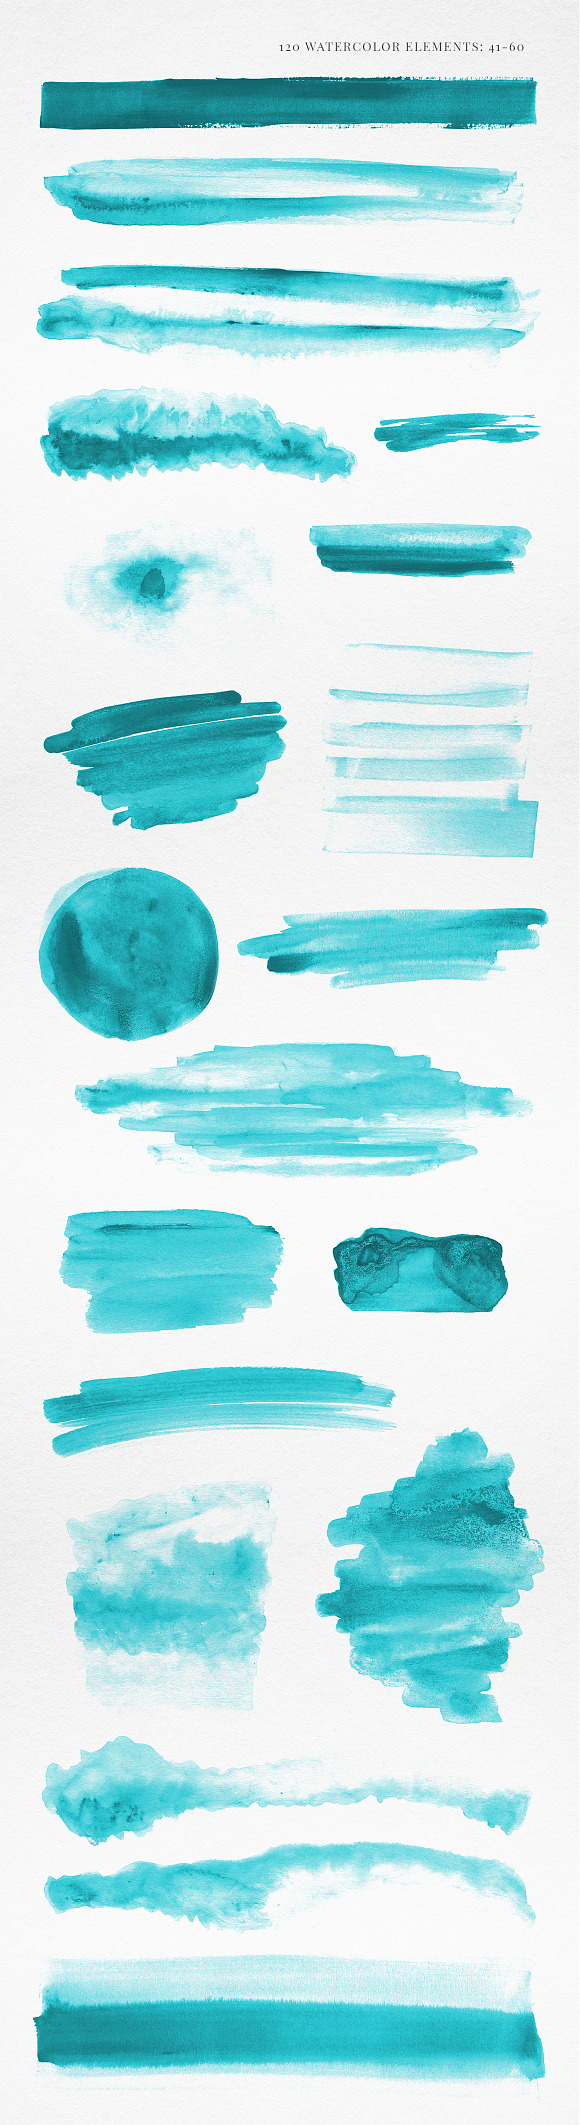 120 Watercolor Elements Turquoise in Textures - product preview 3